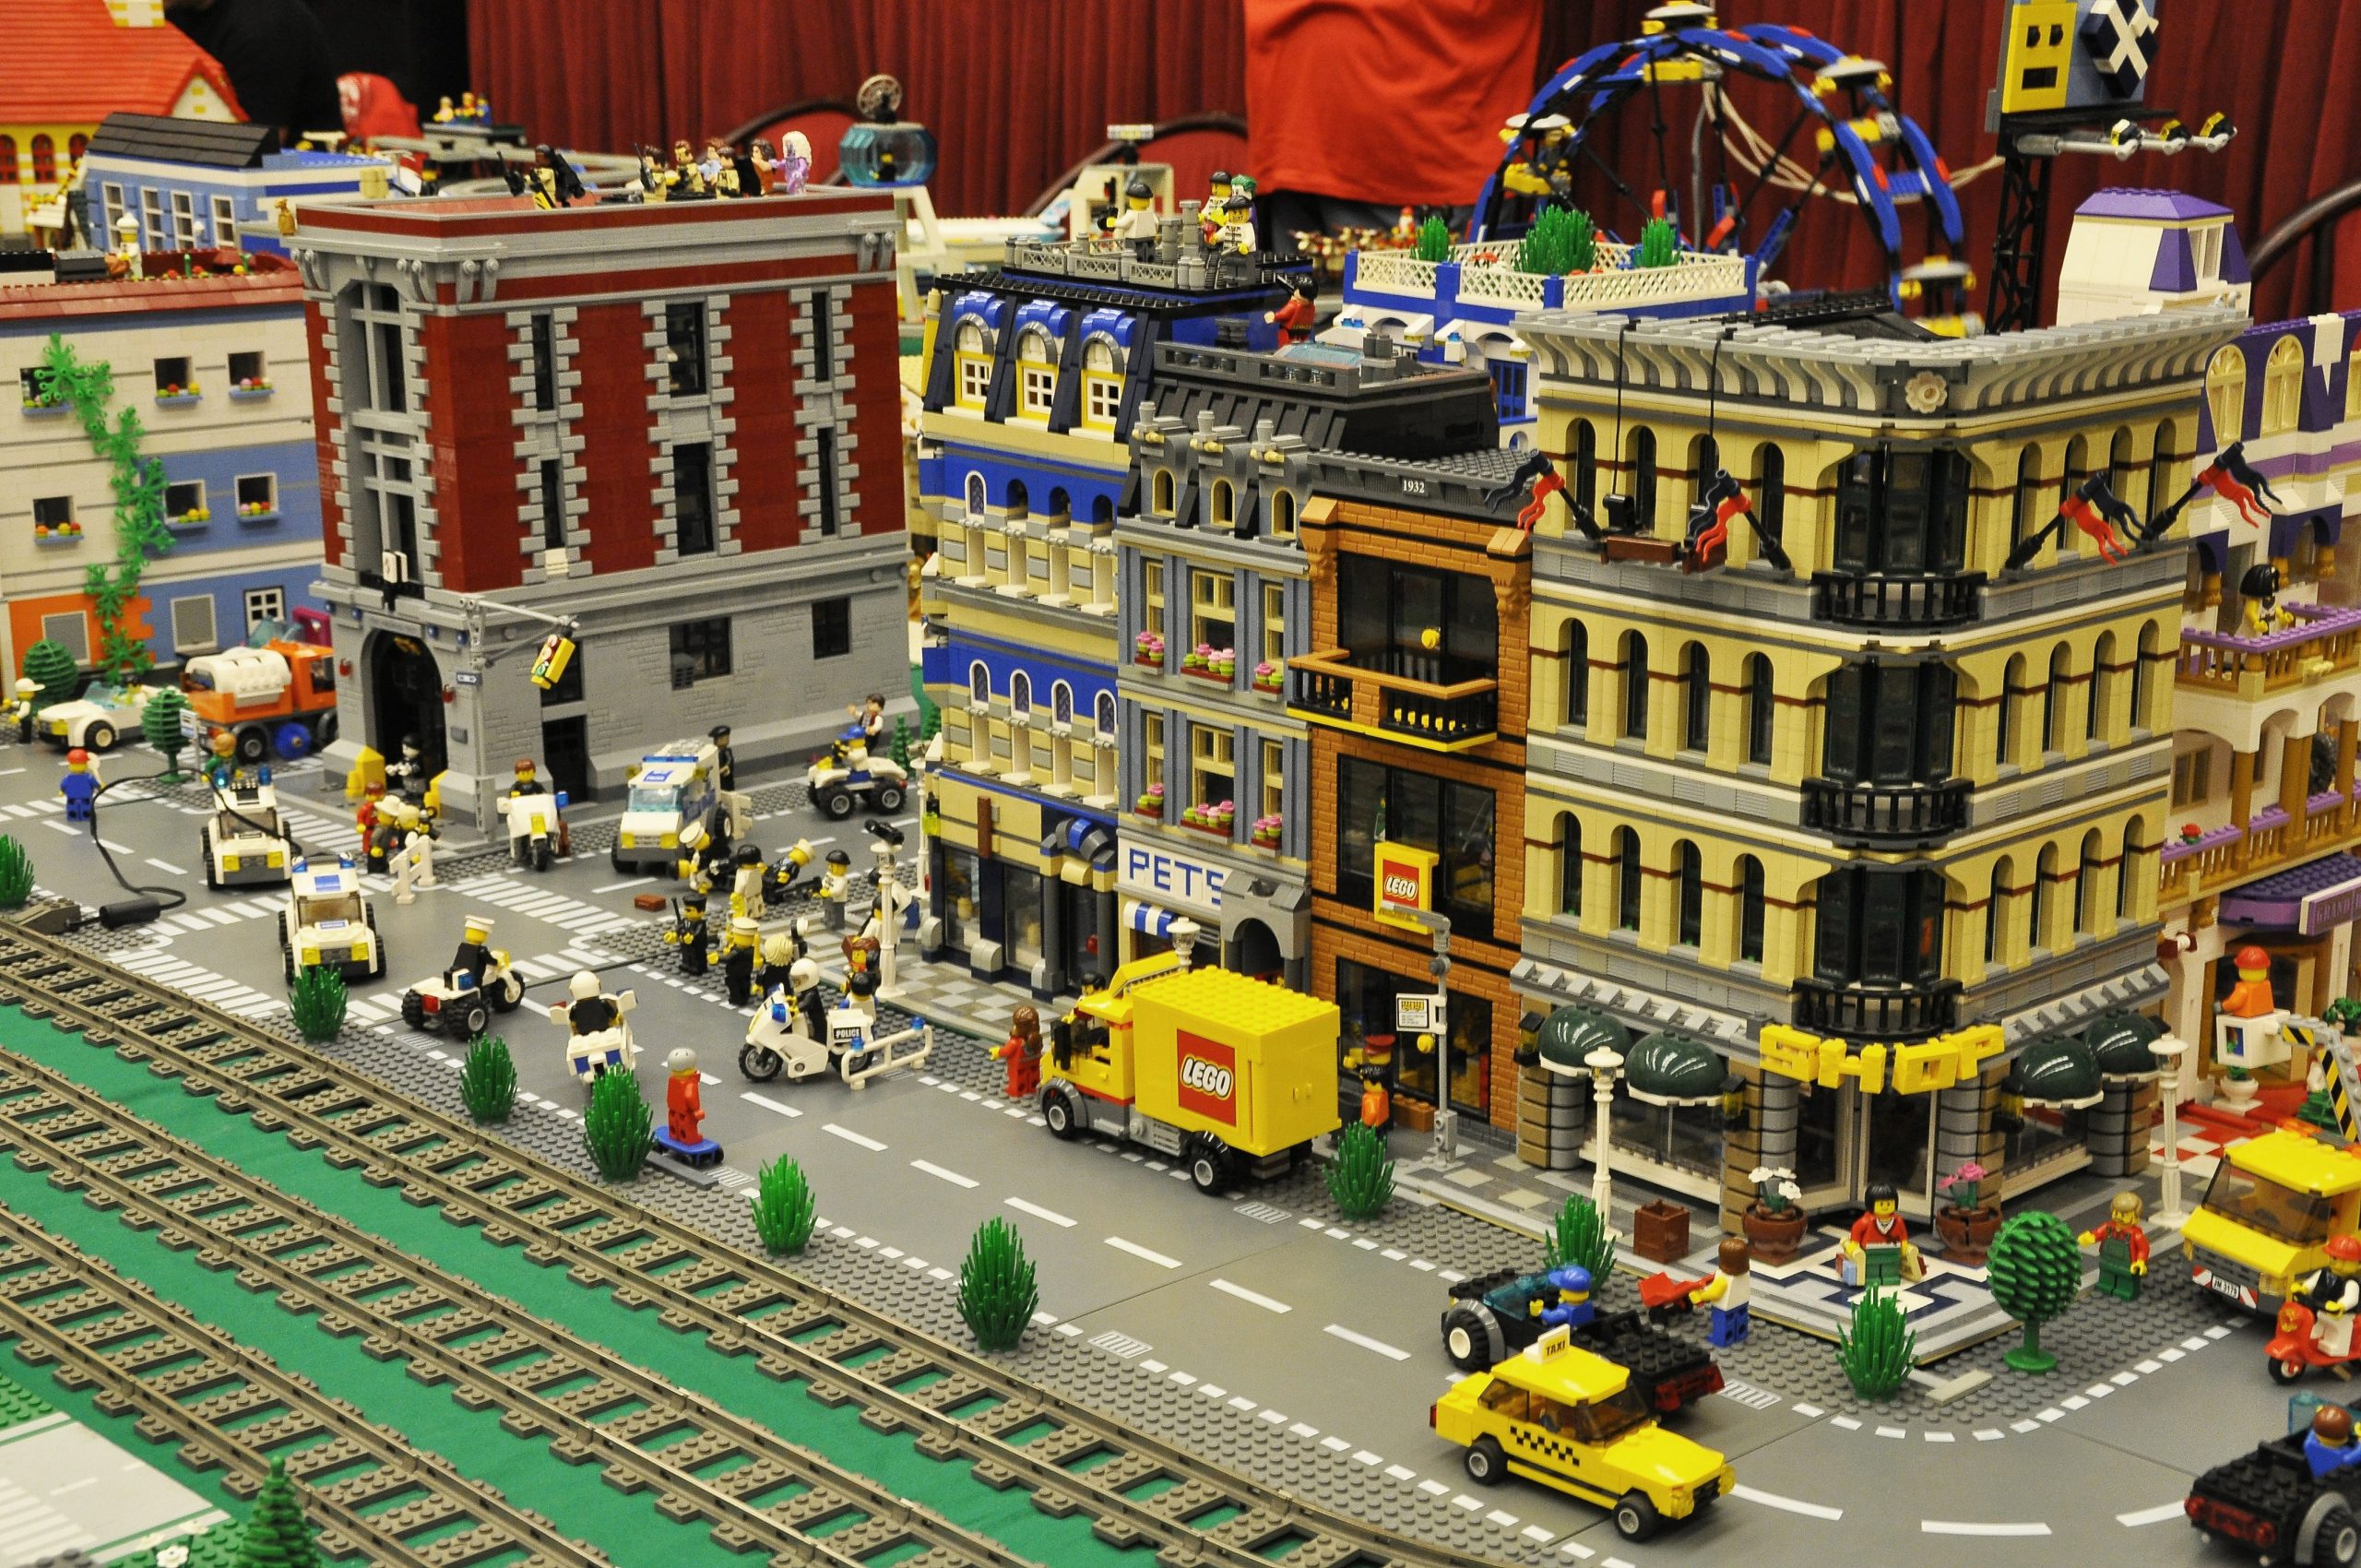 Lego to Invest in Expansion in Hungary